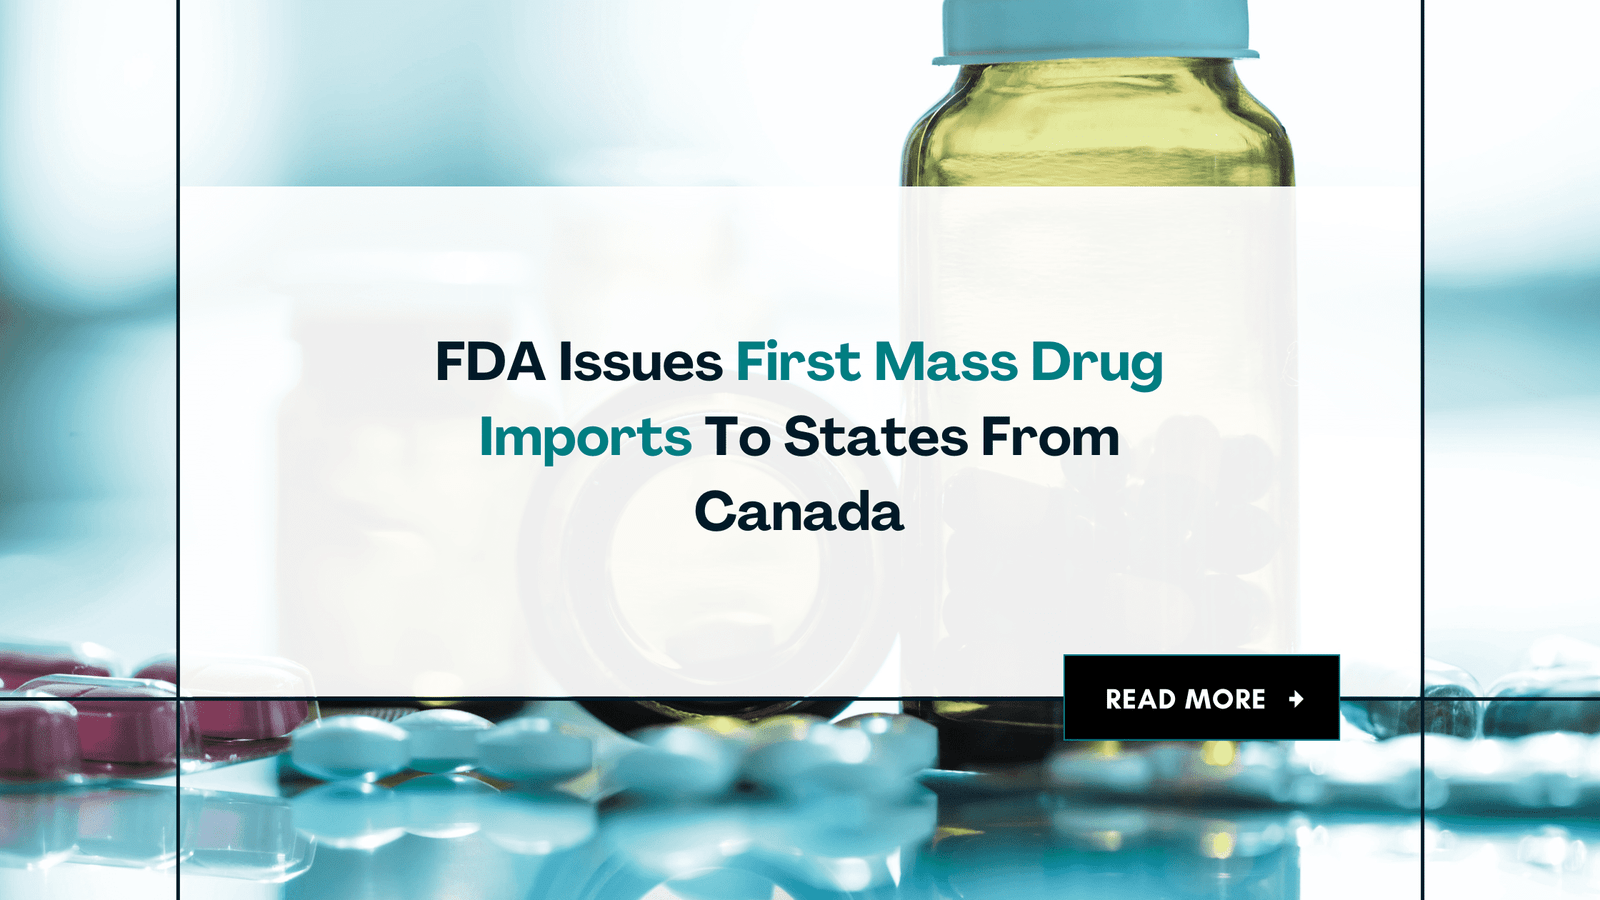 FDA Issues First Mass Drug Imports To States From Canada